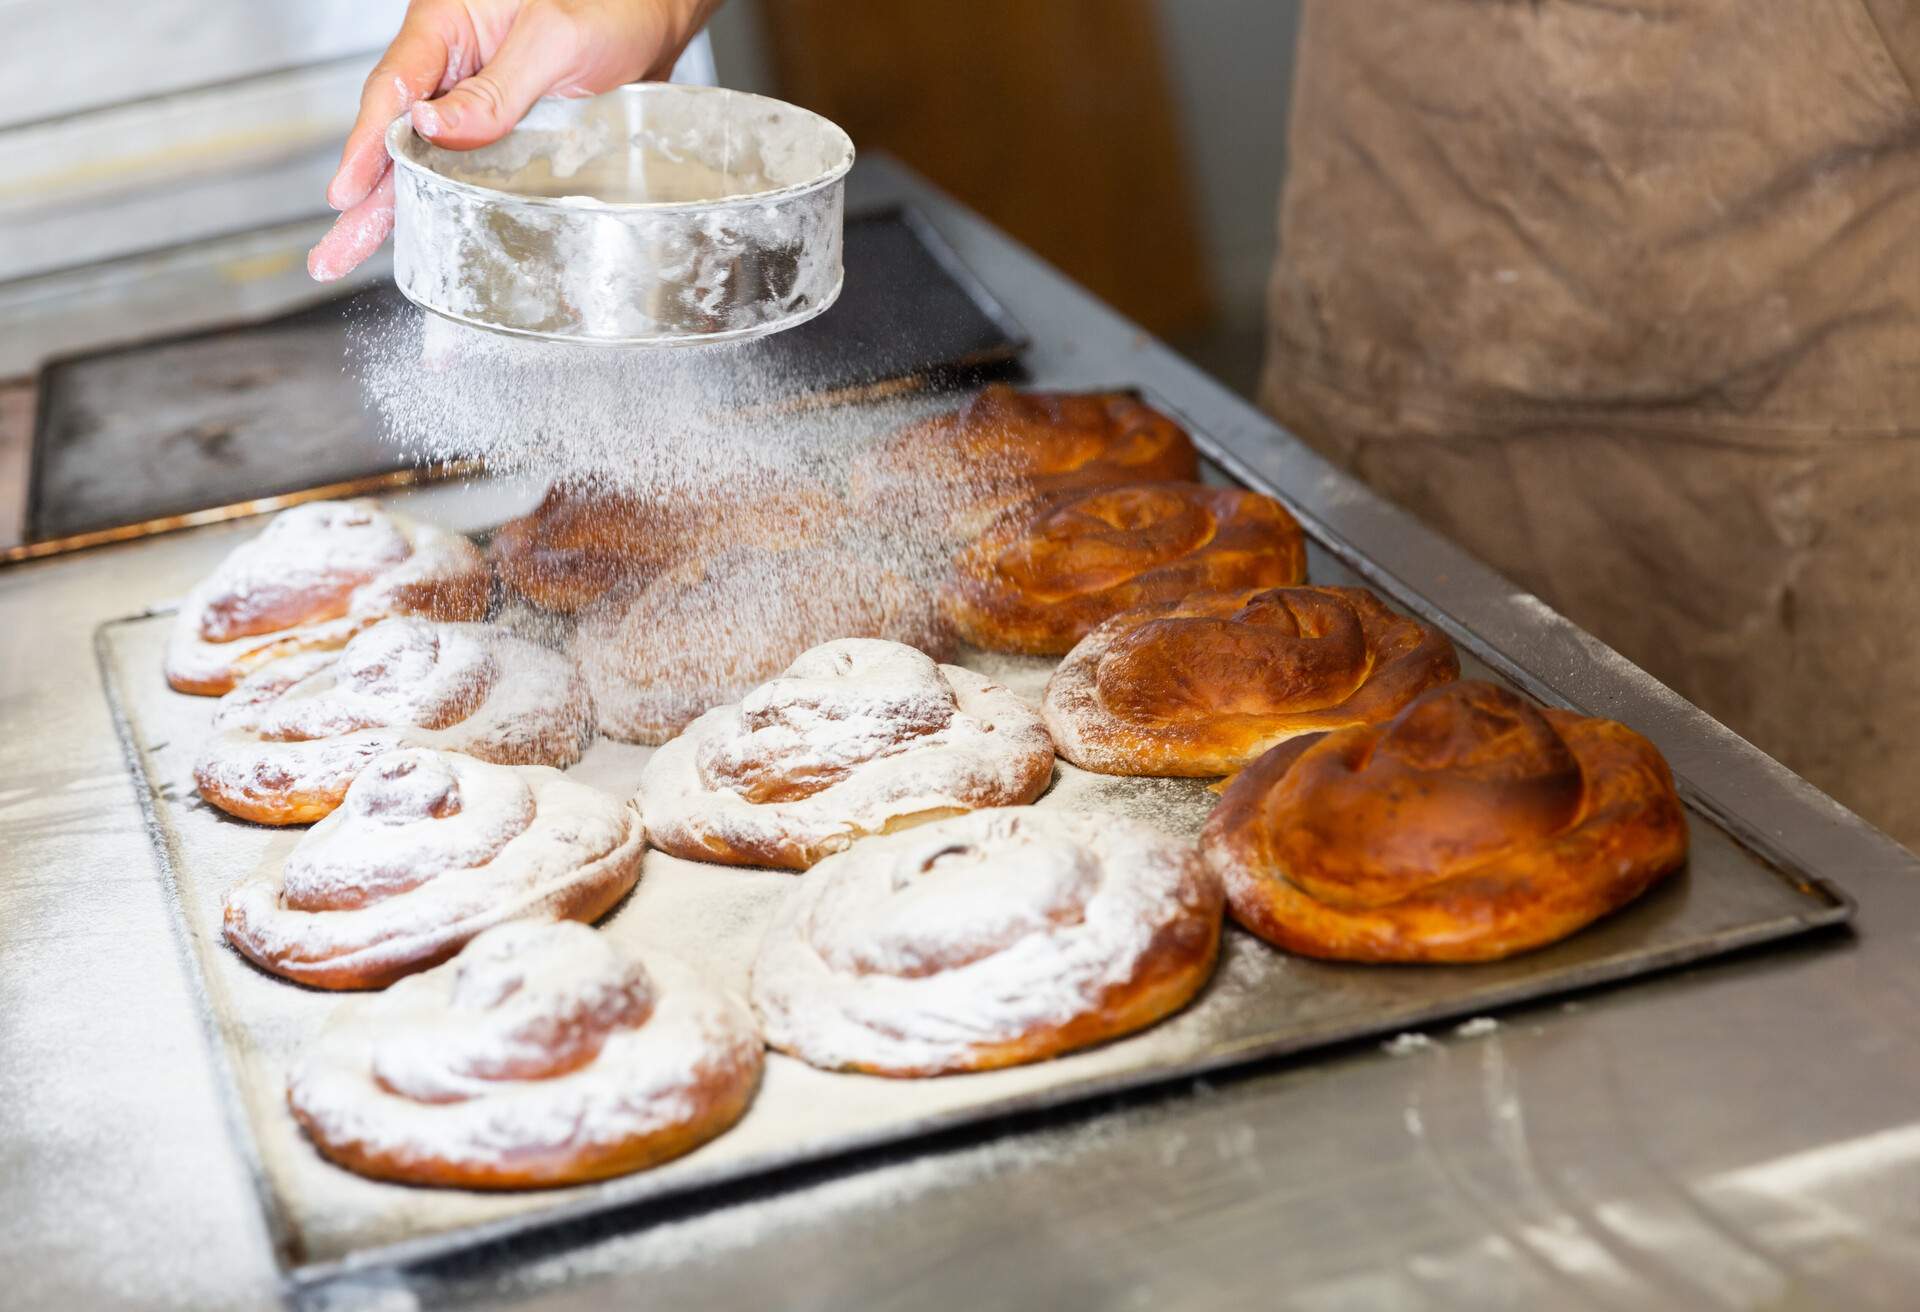 Baker hands dusting freshly baked ensaimadas with powdered sugar in bakery. Baking process of traditional Spanish pastries